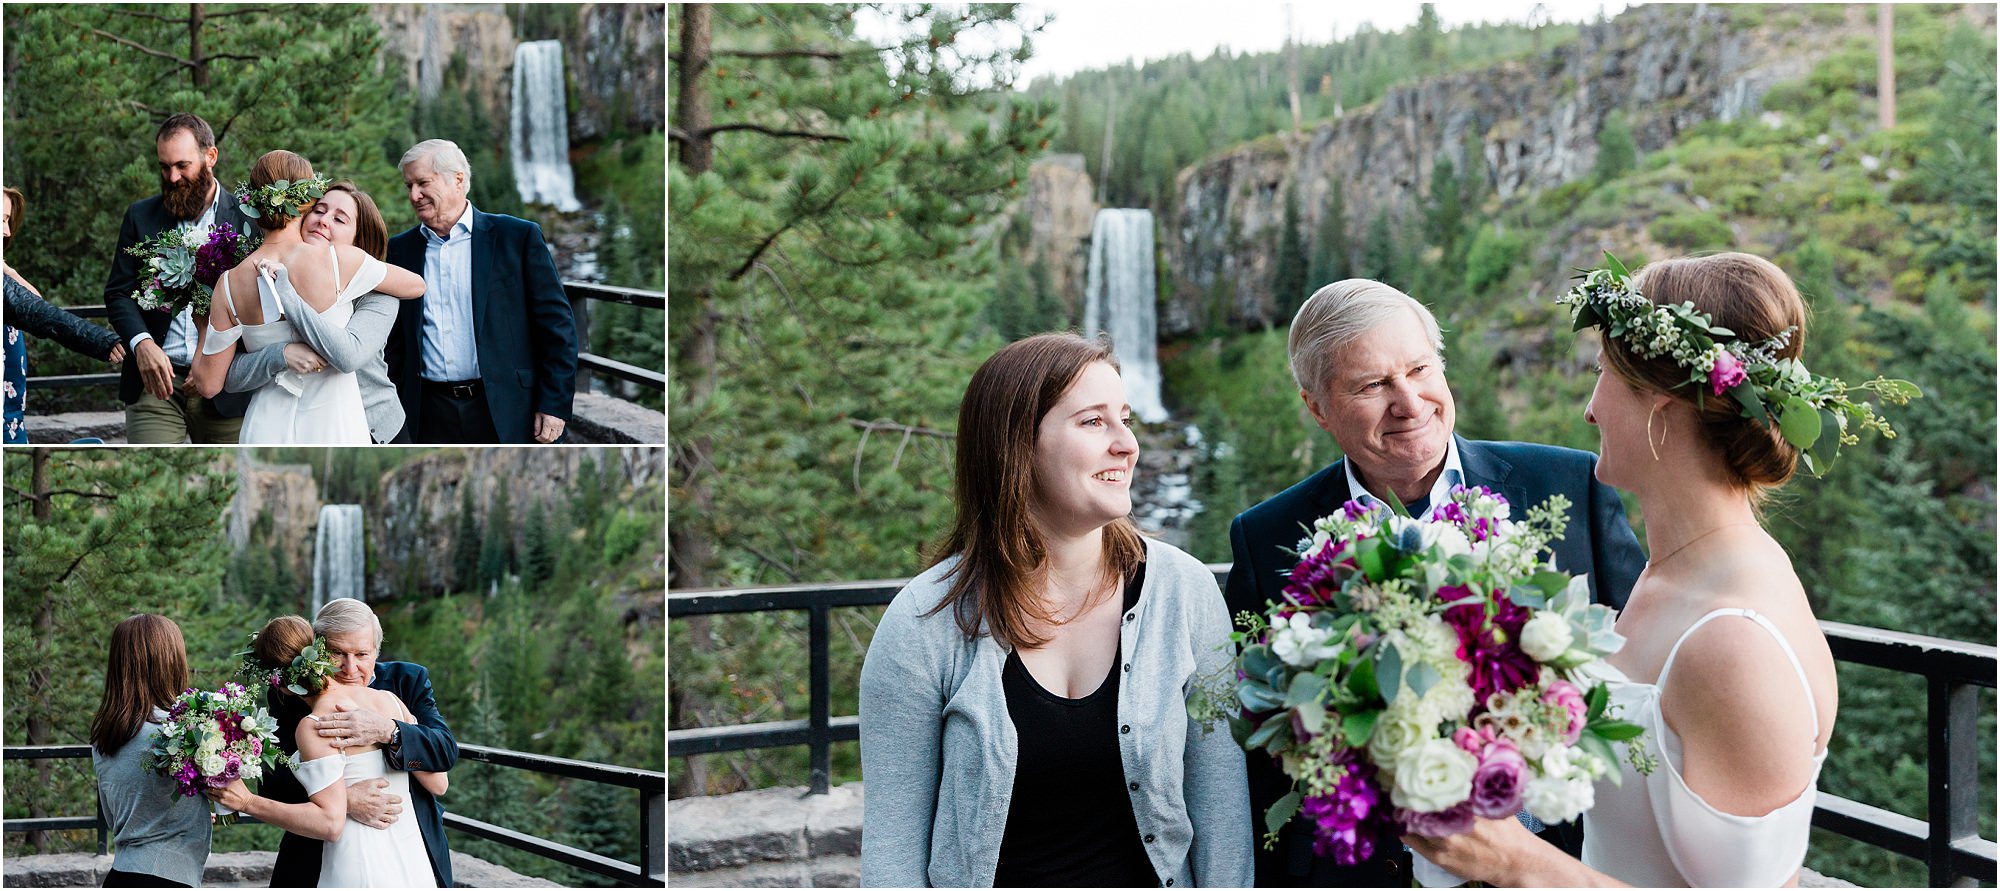 A bride hugs her sister and dad after her intimate elopement at the base of a waterfall in Oregon. | Erica Swantek Photography